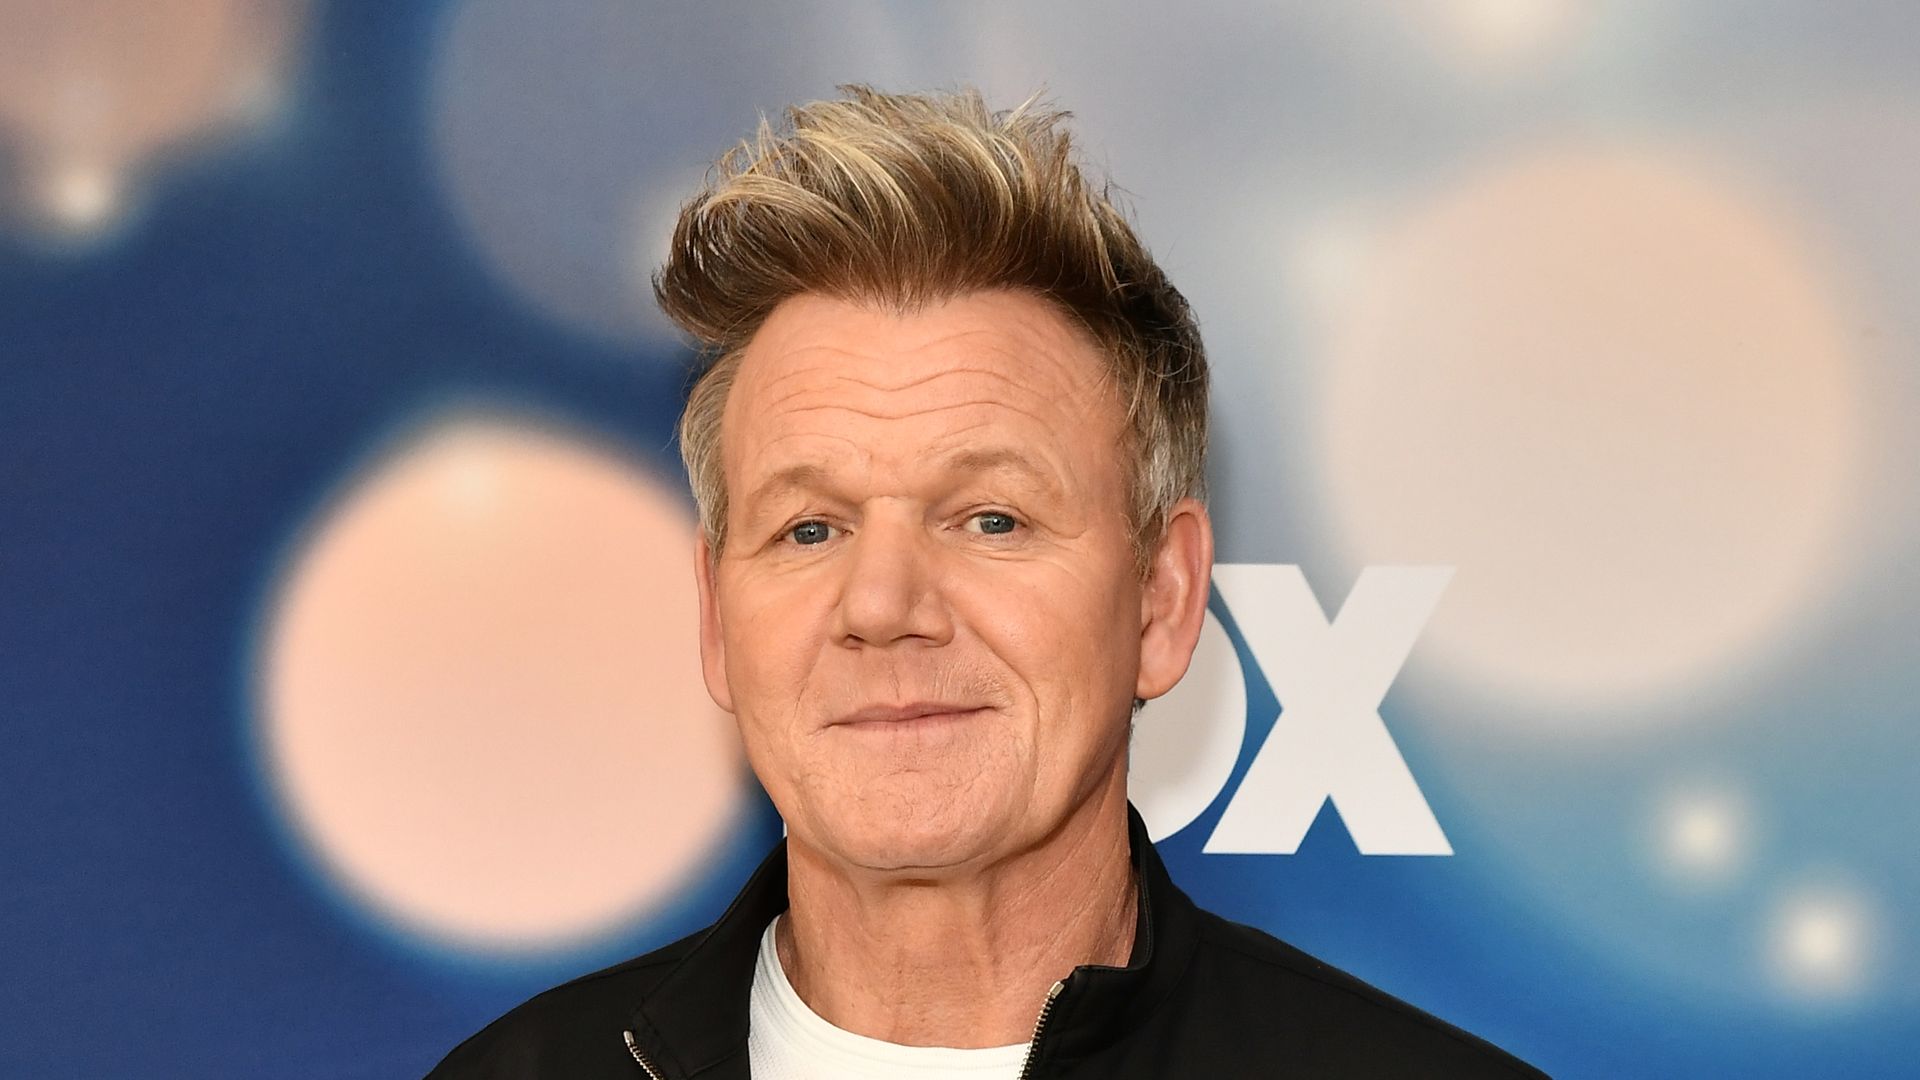 Gordon Ramsay in a black jacket and jeans